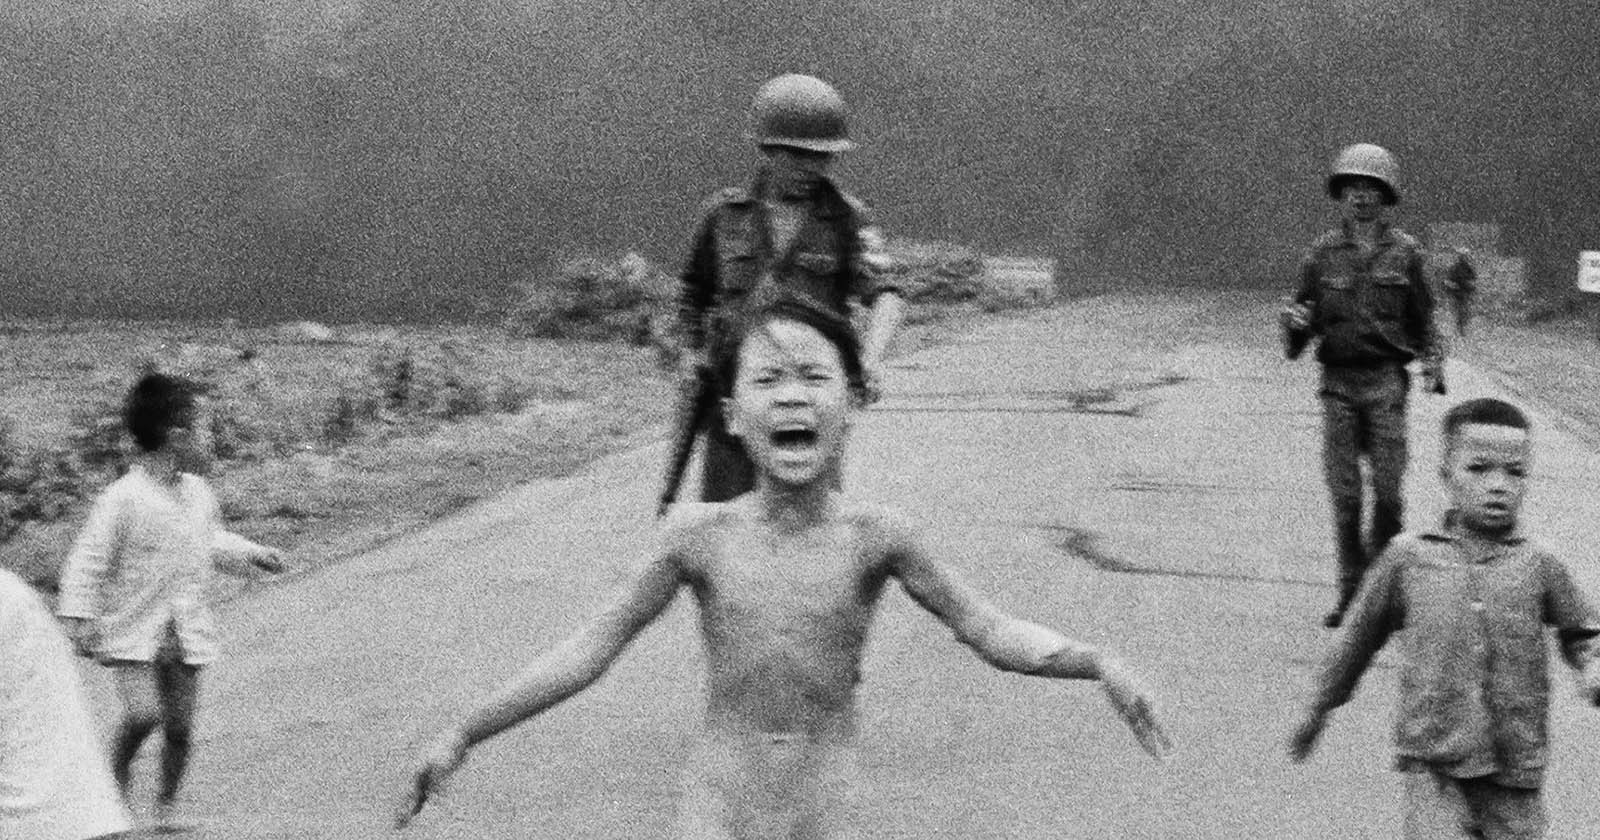 Vietnamese 'Napalm Girl' gets final skin treatment 50 years after the iconic photo